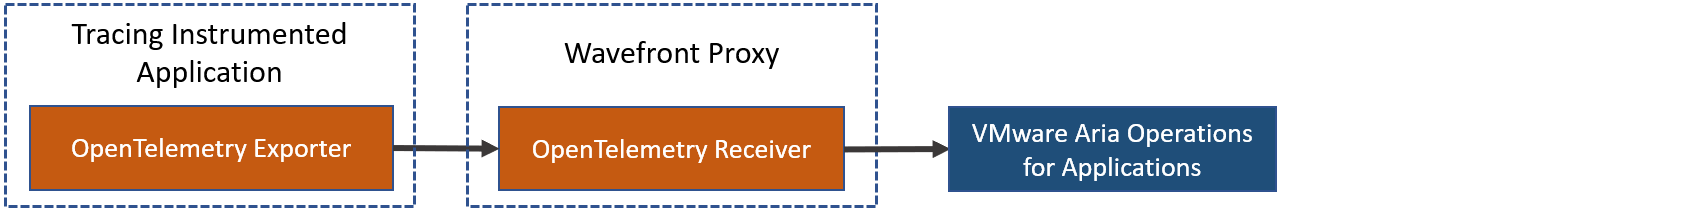 A data flow diagram that shows how the data flows from your application to the proxy, and then to our service